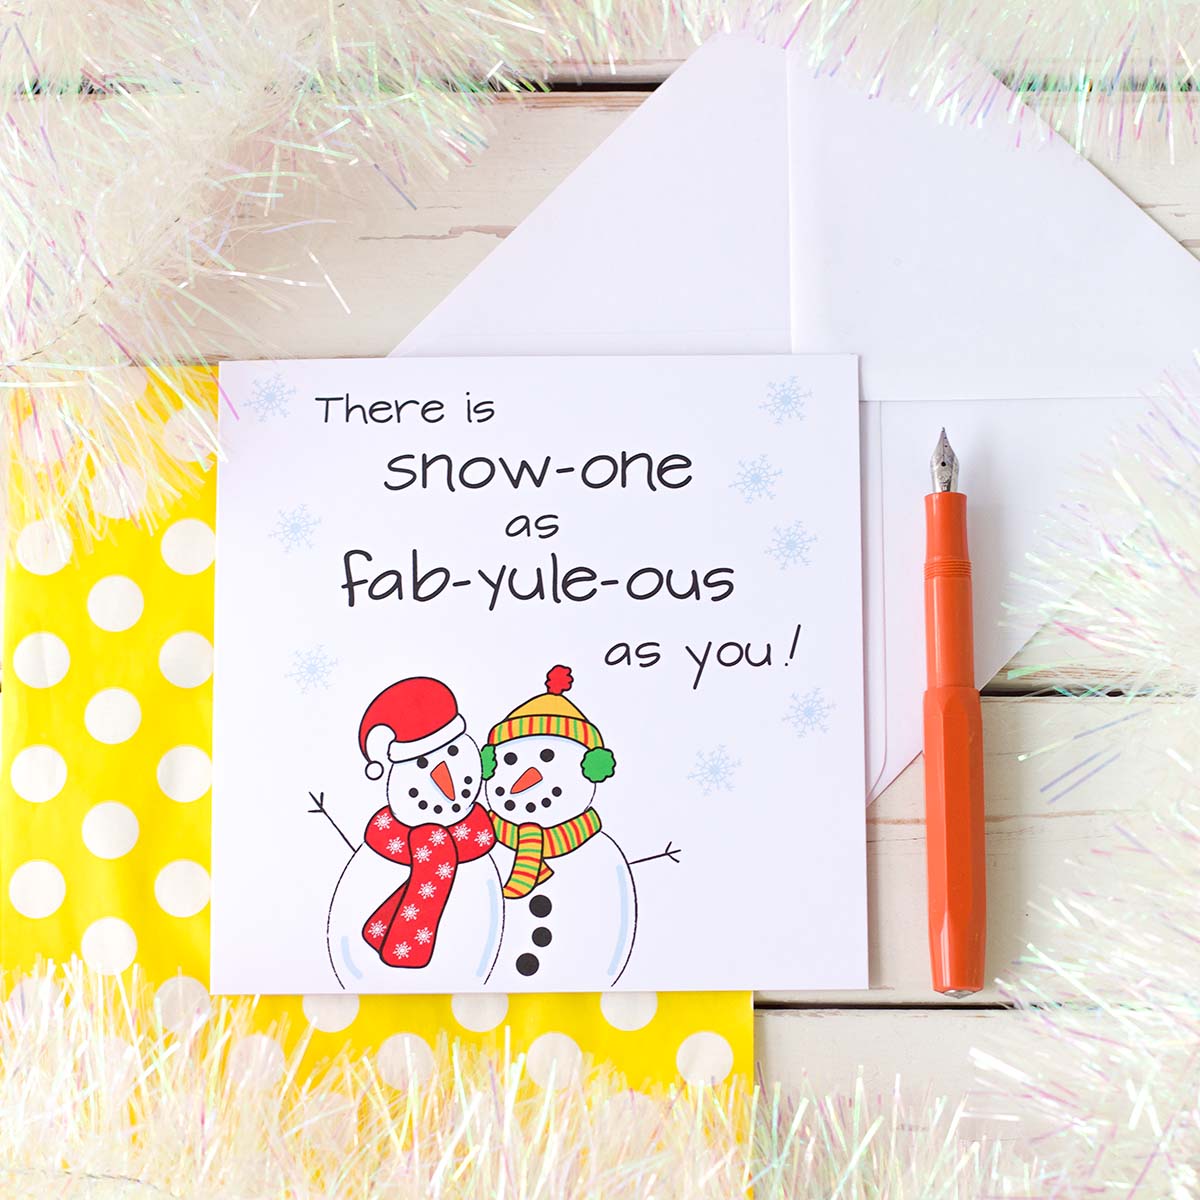 Illustrated Christmas Card by fizzi~jayne. Two snowmen hugging, one wearing a santa hat and red scarf th other with a bobble hat, ear muffs and scarf.  The handkettering reads There is Snow-one as fab-yule-ous as you!